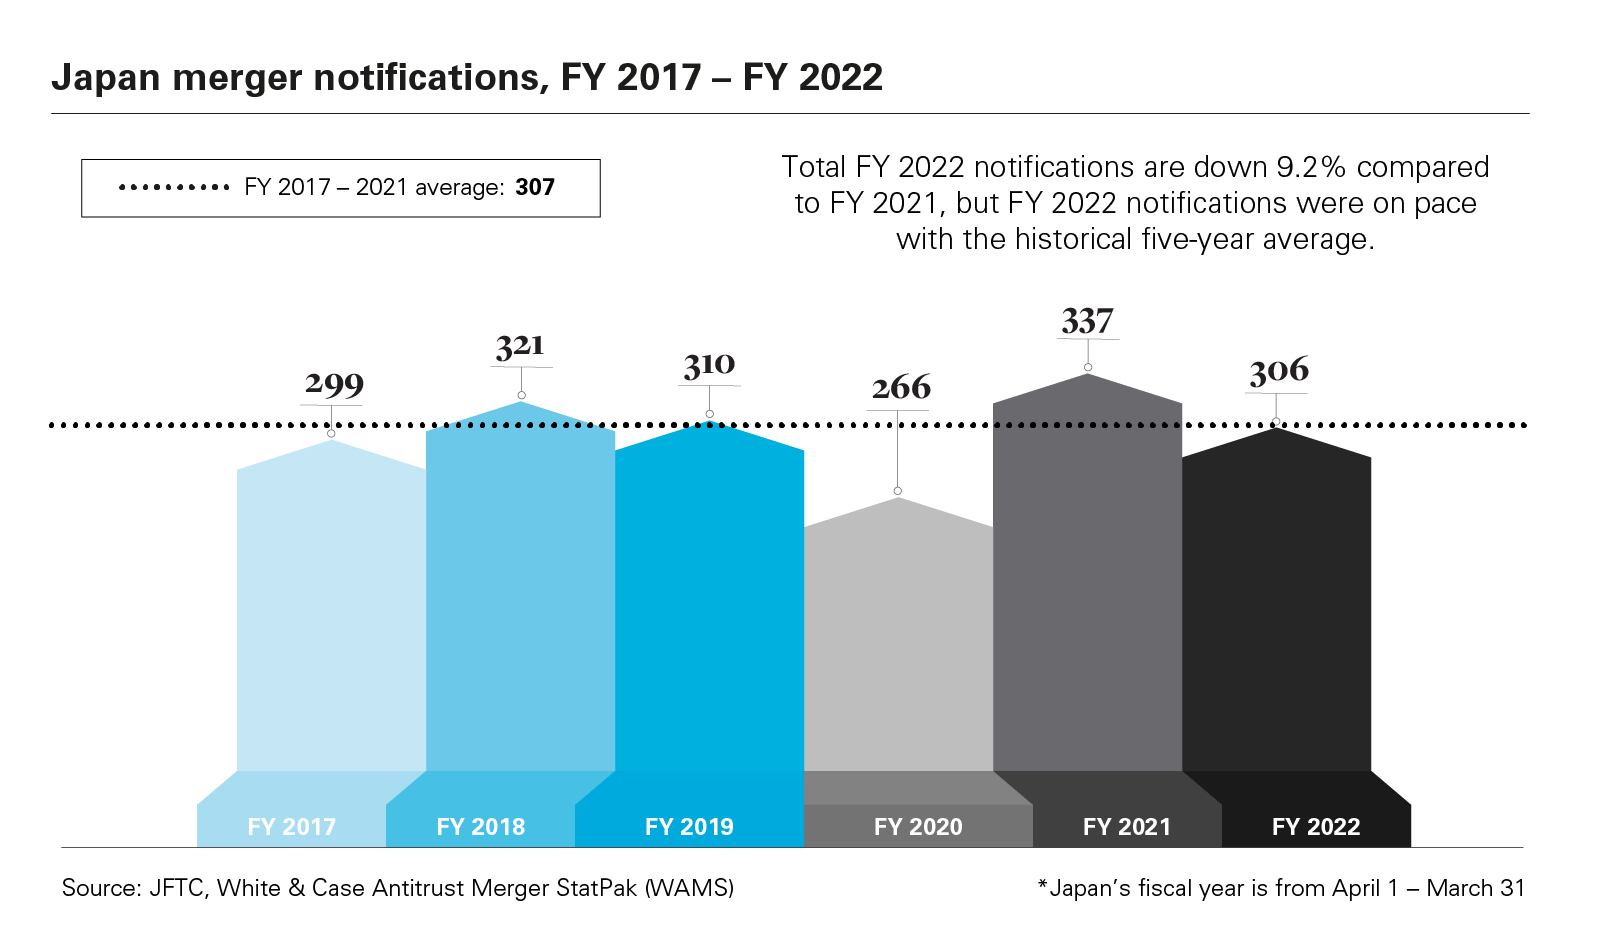 Japan merger notifications, FY 2017 - FY 2022 graph